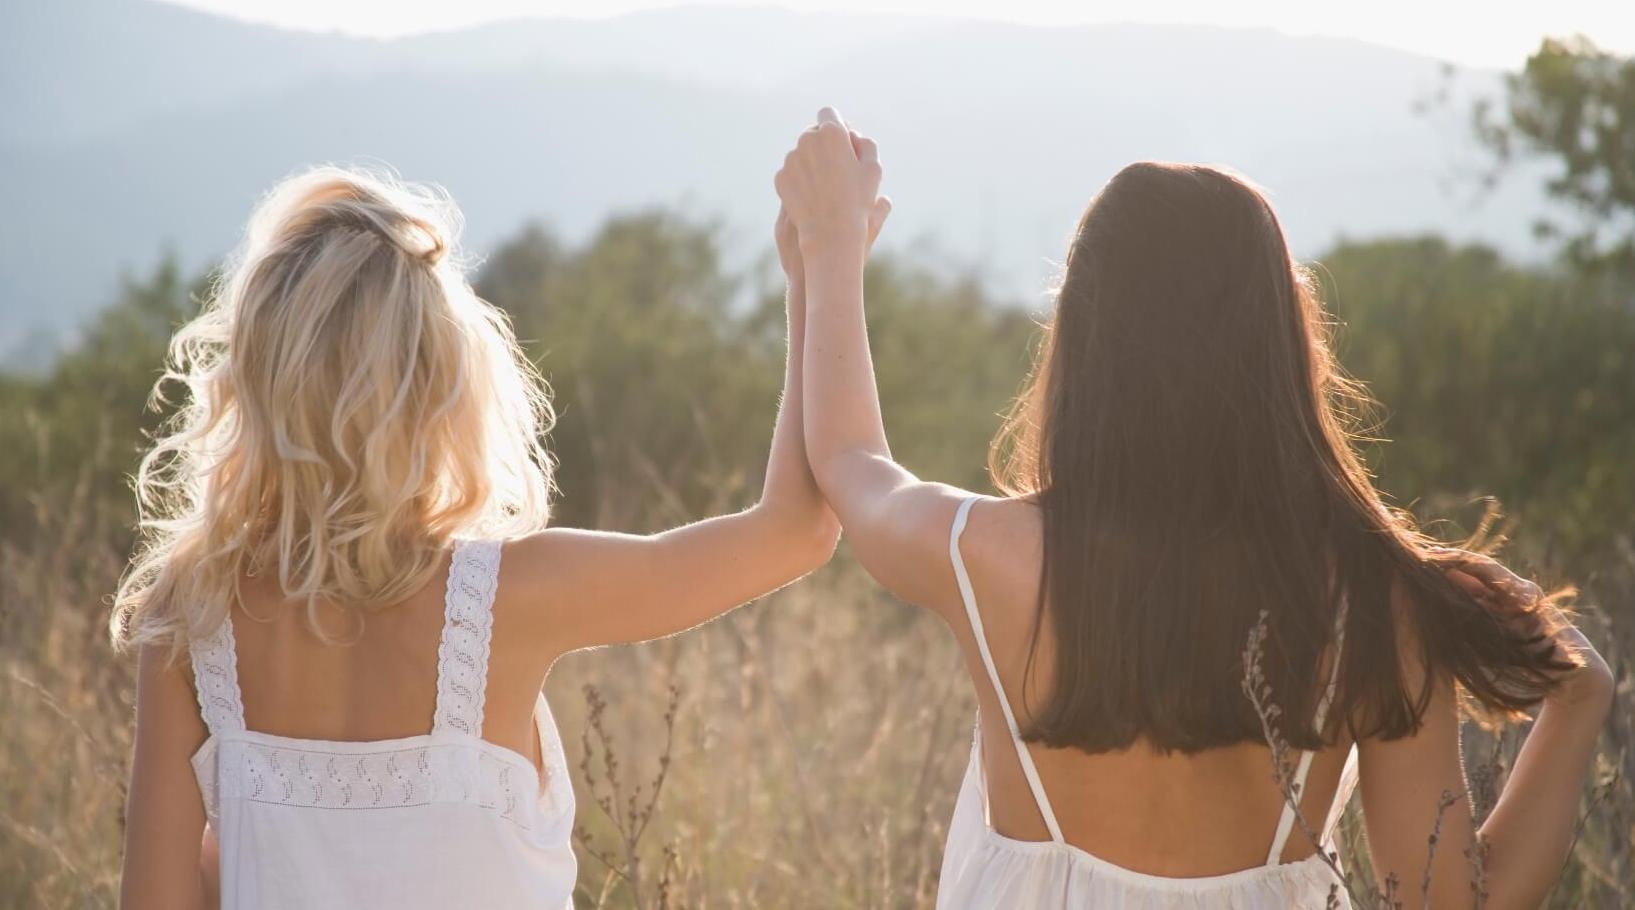 Two women in a meadow holding hands, symbolizing strong relationships through mindfulness